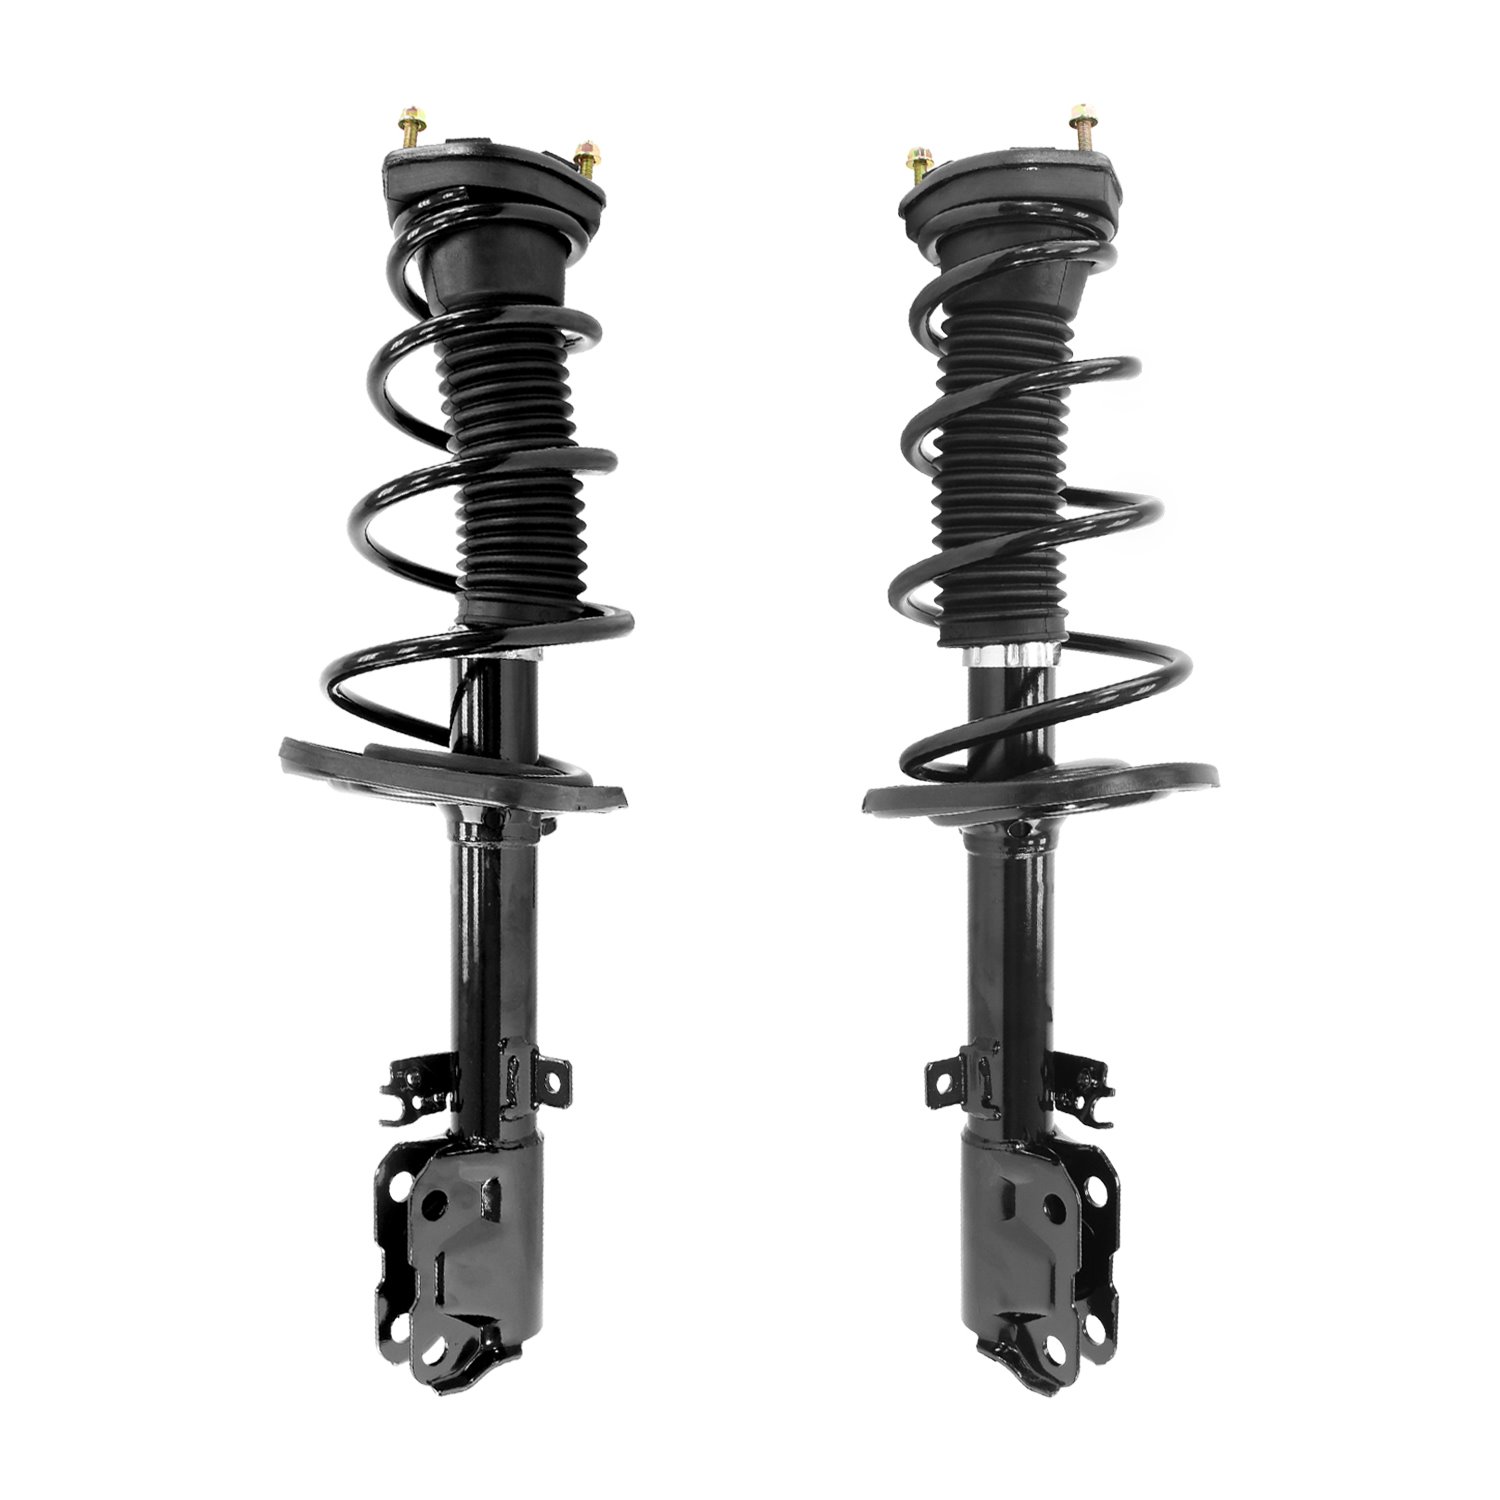 2-15025-15026-001 Suspension Strut & Coil Spring Assembly Set Fits Select Toyota Camry